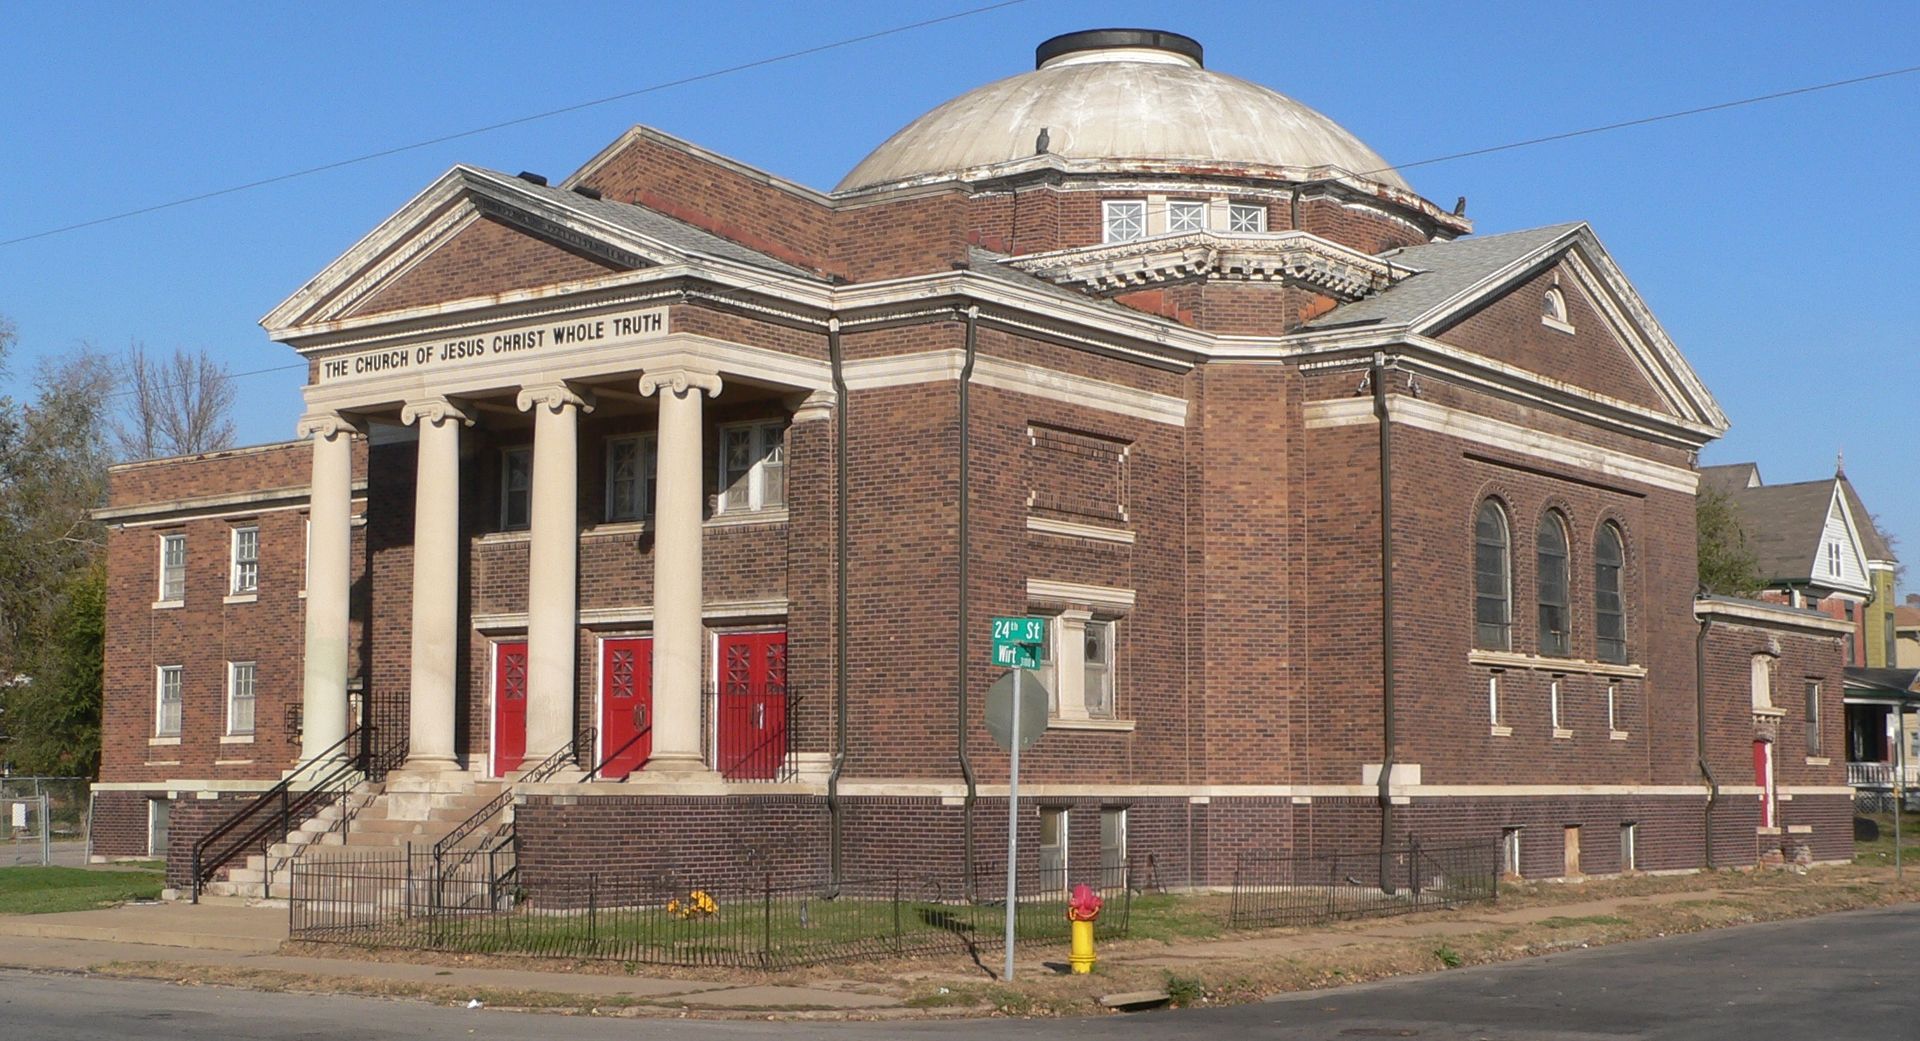 This picture shows the Church of Jesus Christ Whole Truth at N. 24th and Wirt Streets, North Omaha, Nebraska